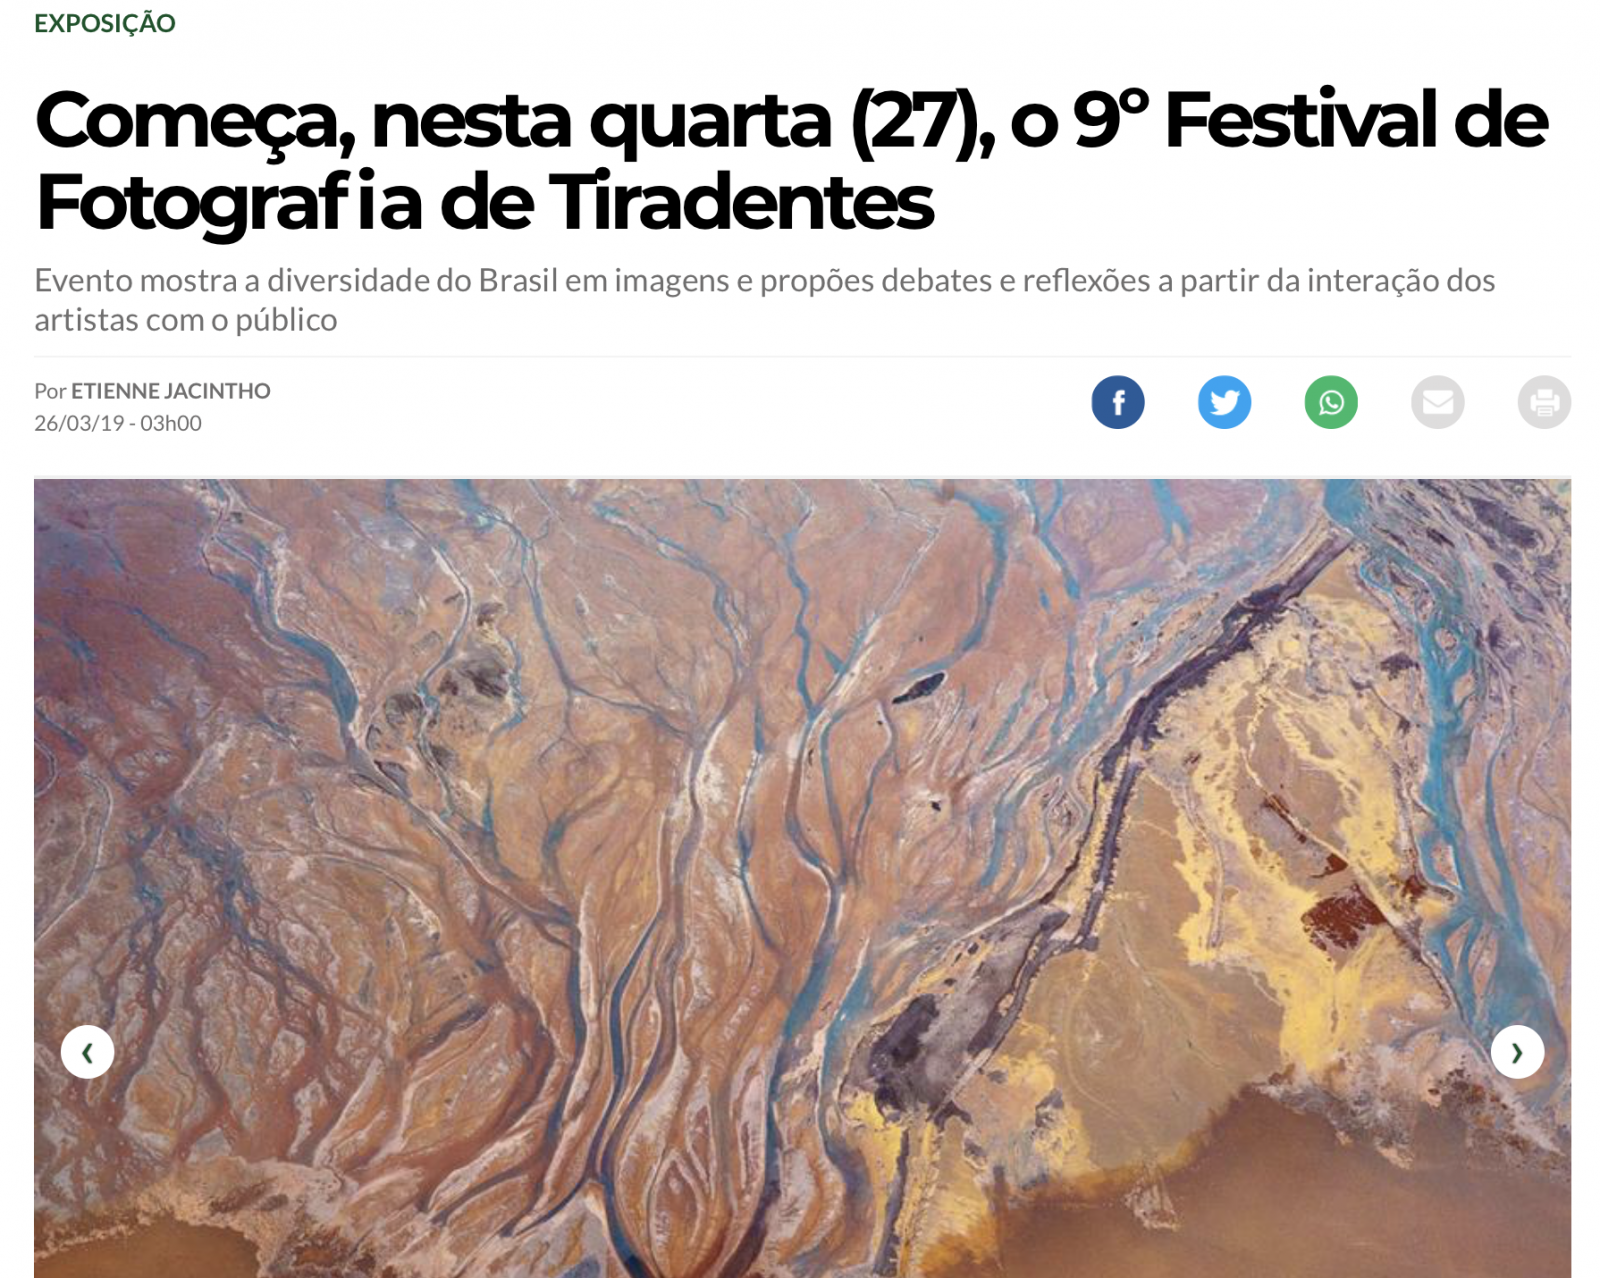 Honored to have my work featured in an article at Jornal O Tempo